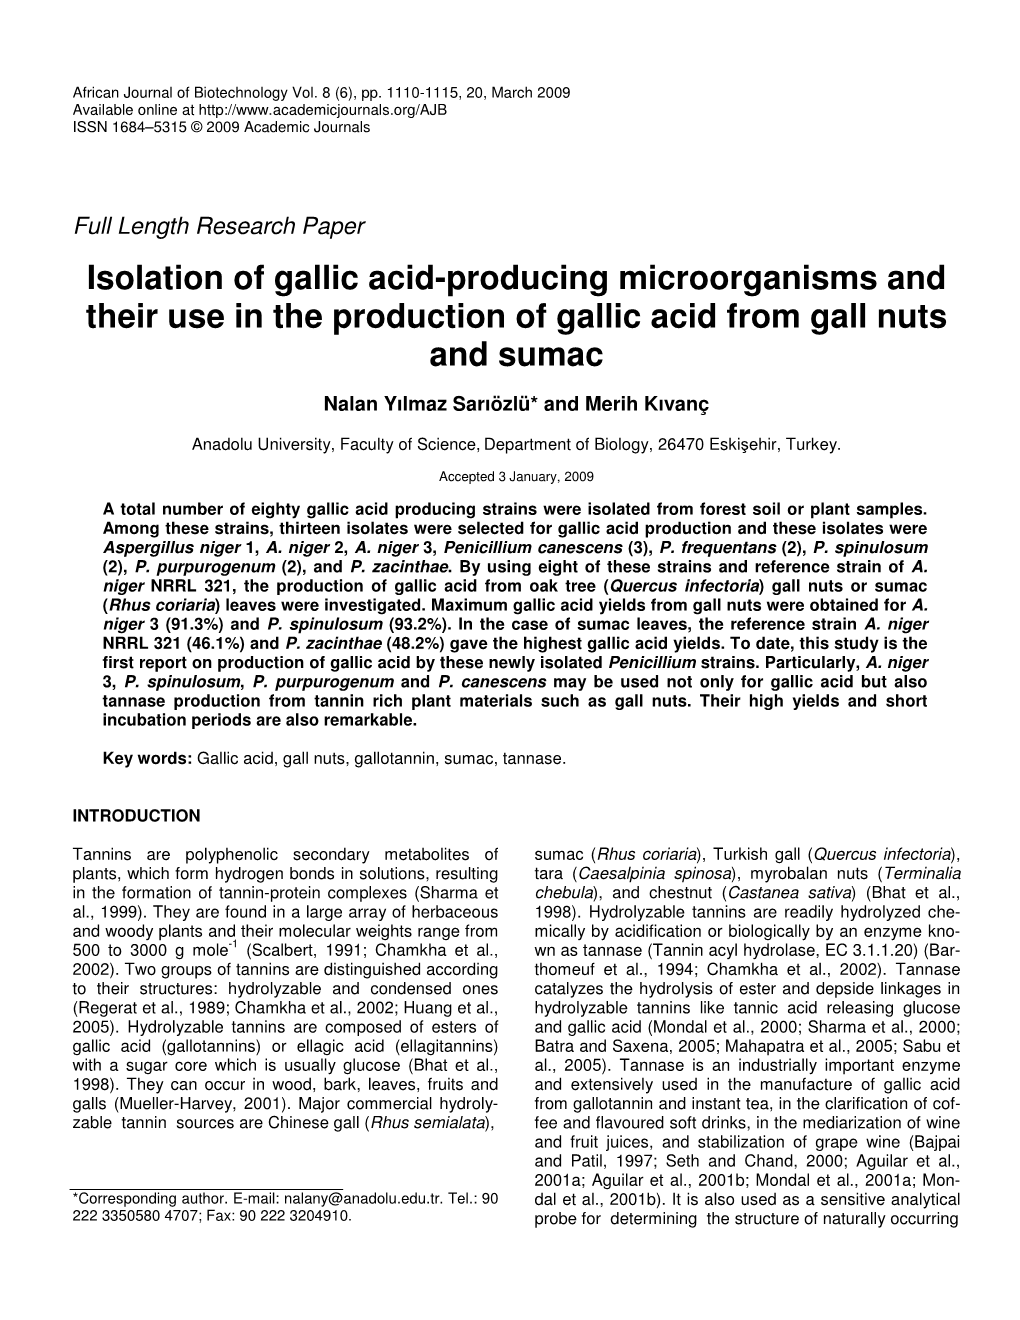 Isolation of Gallic Acid-Producing Microorganisms and Their Use in the Production of Gallic Acid from Gall Nuts and Sumac